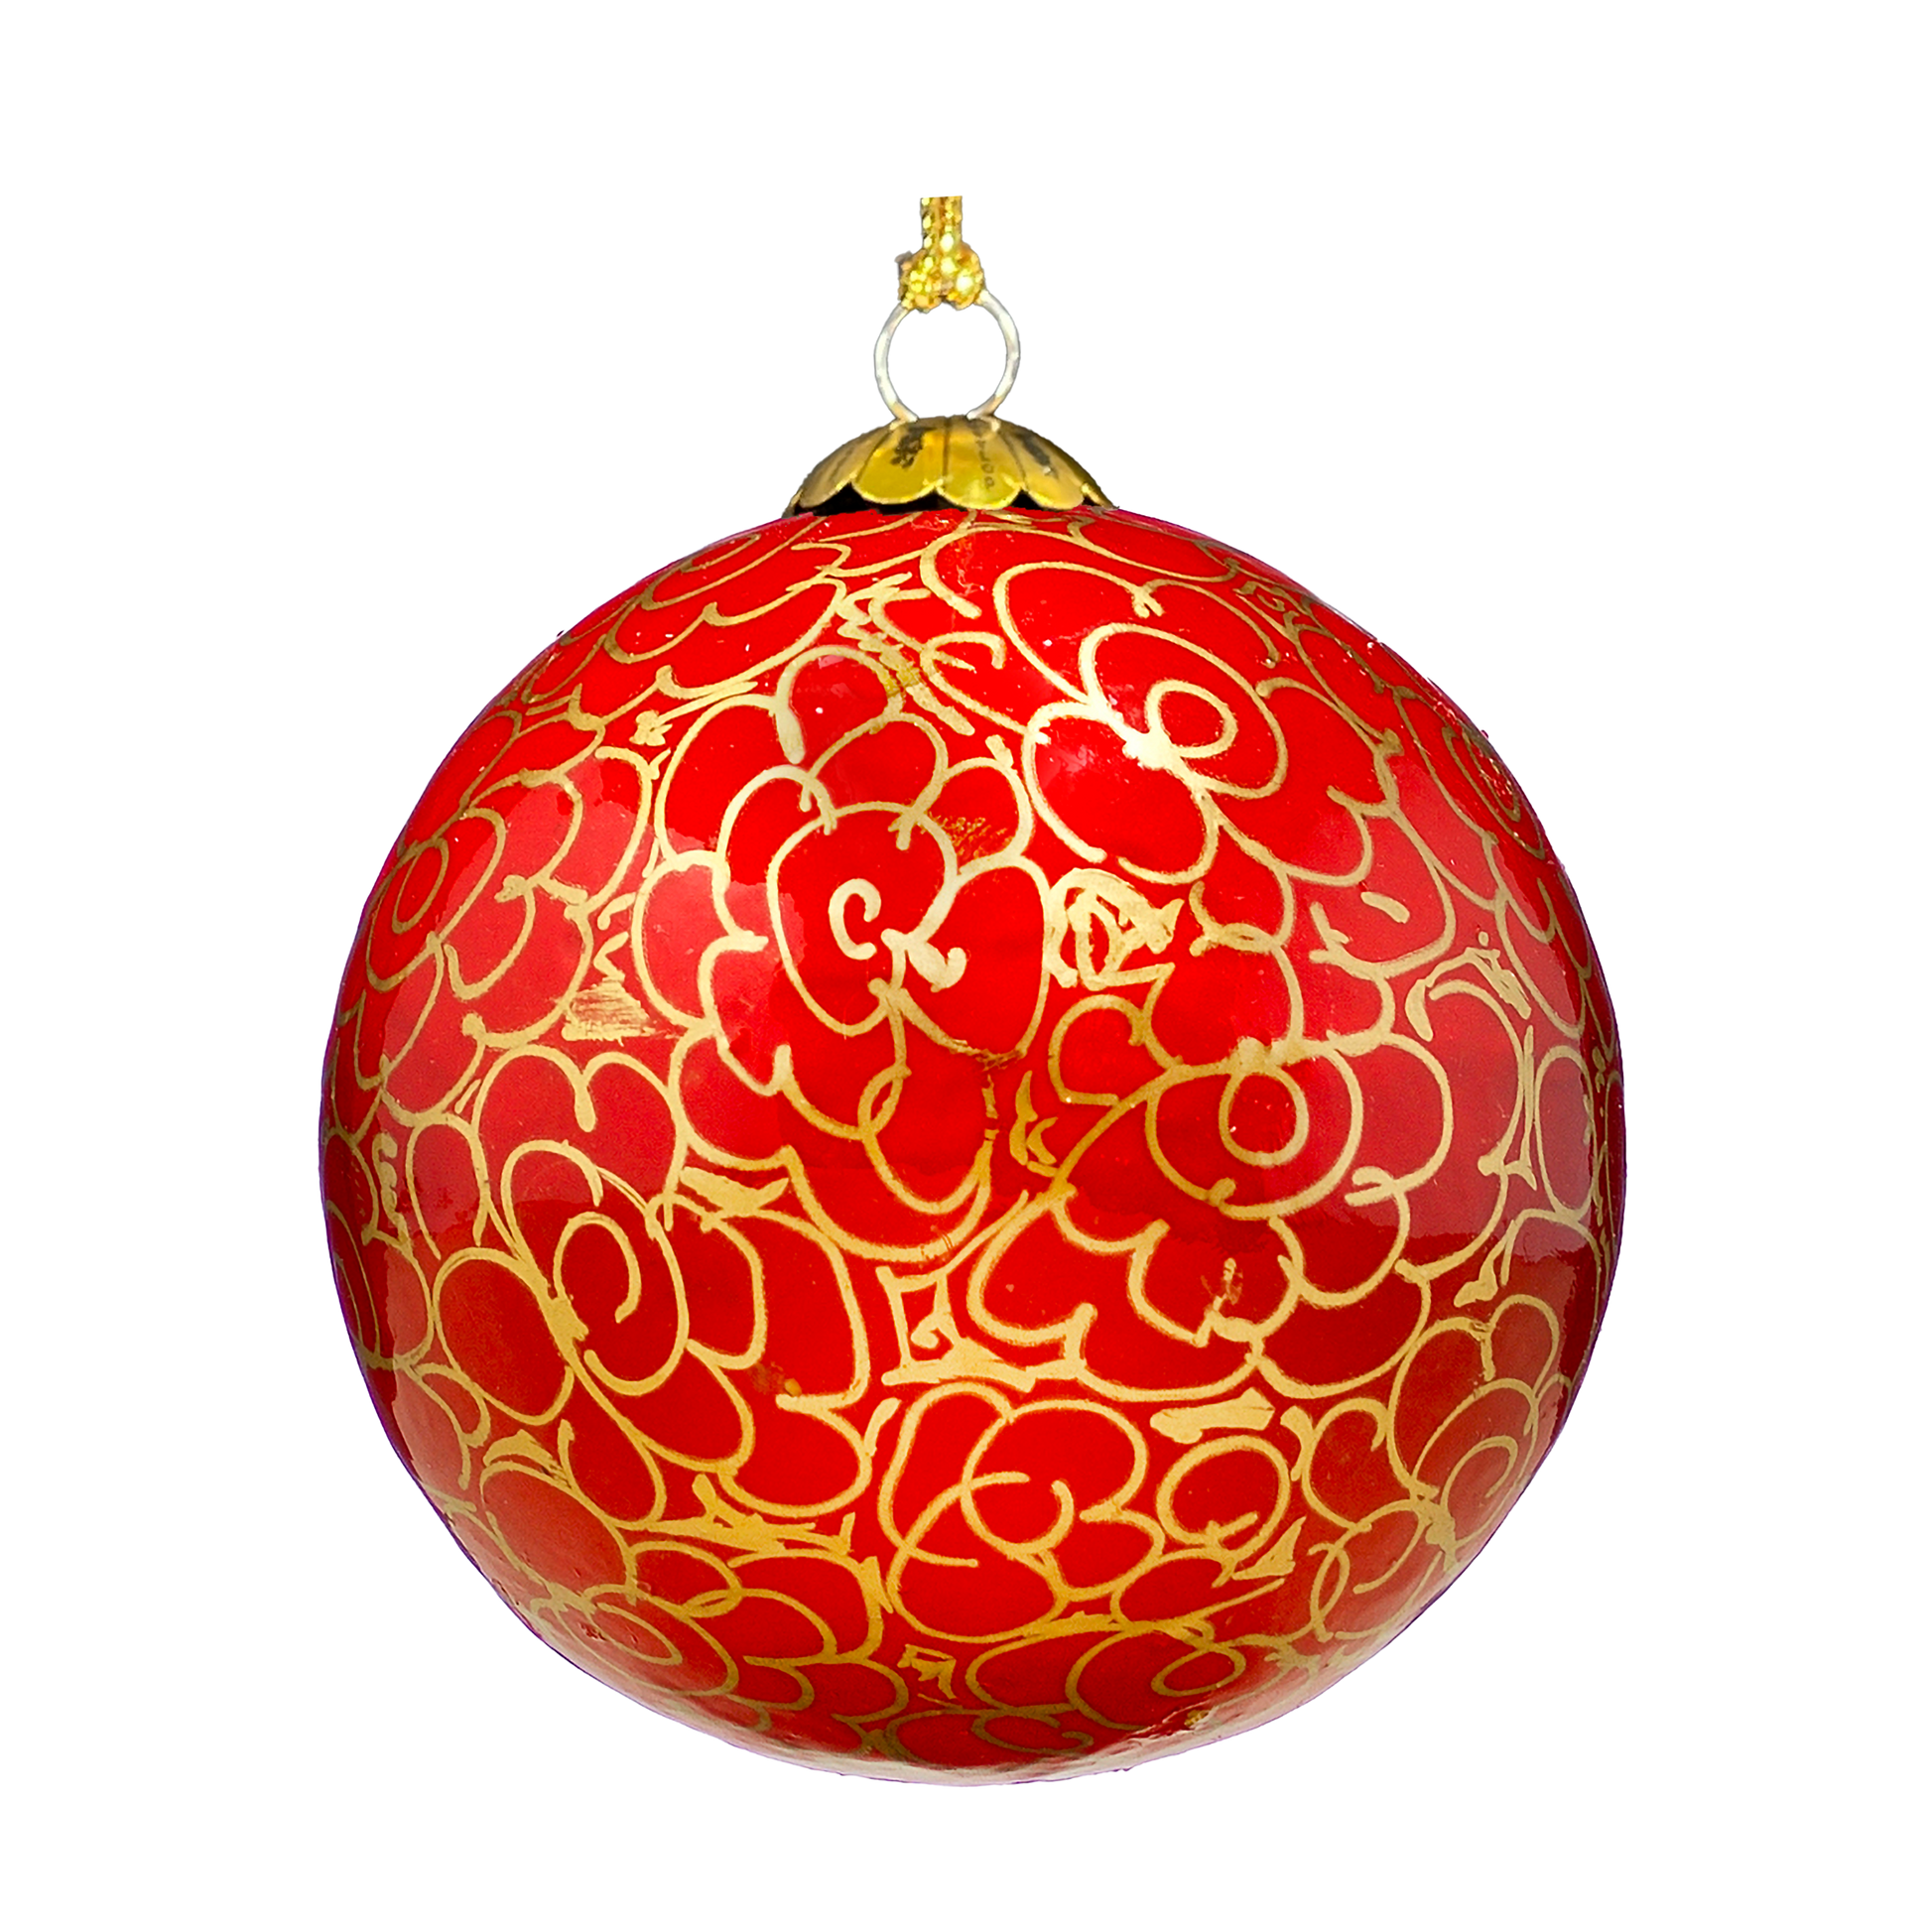 Enchanted Red Gold Christmas Bauble for Christmas tree decorations